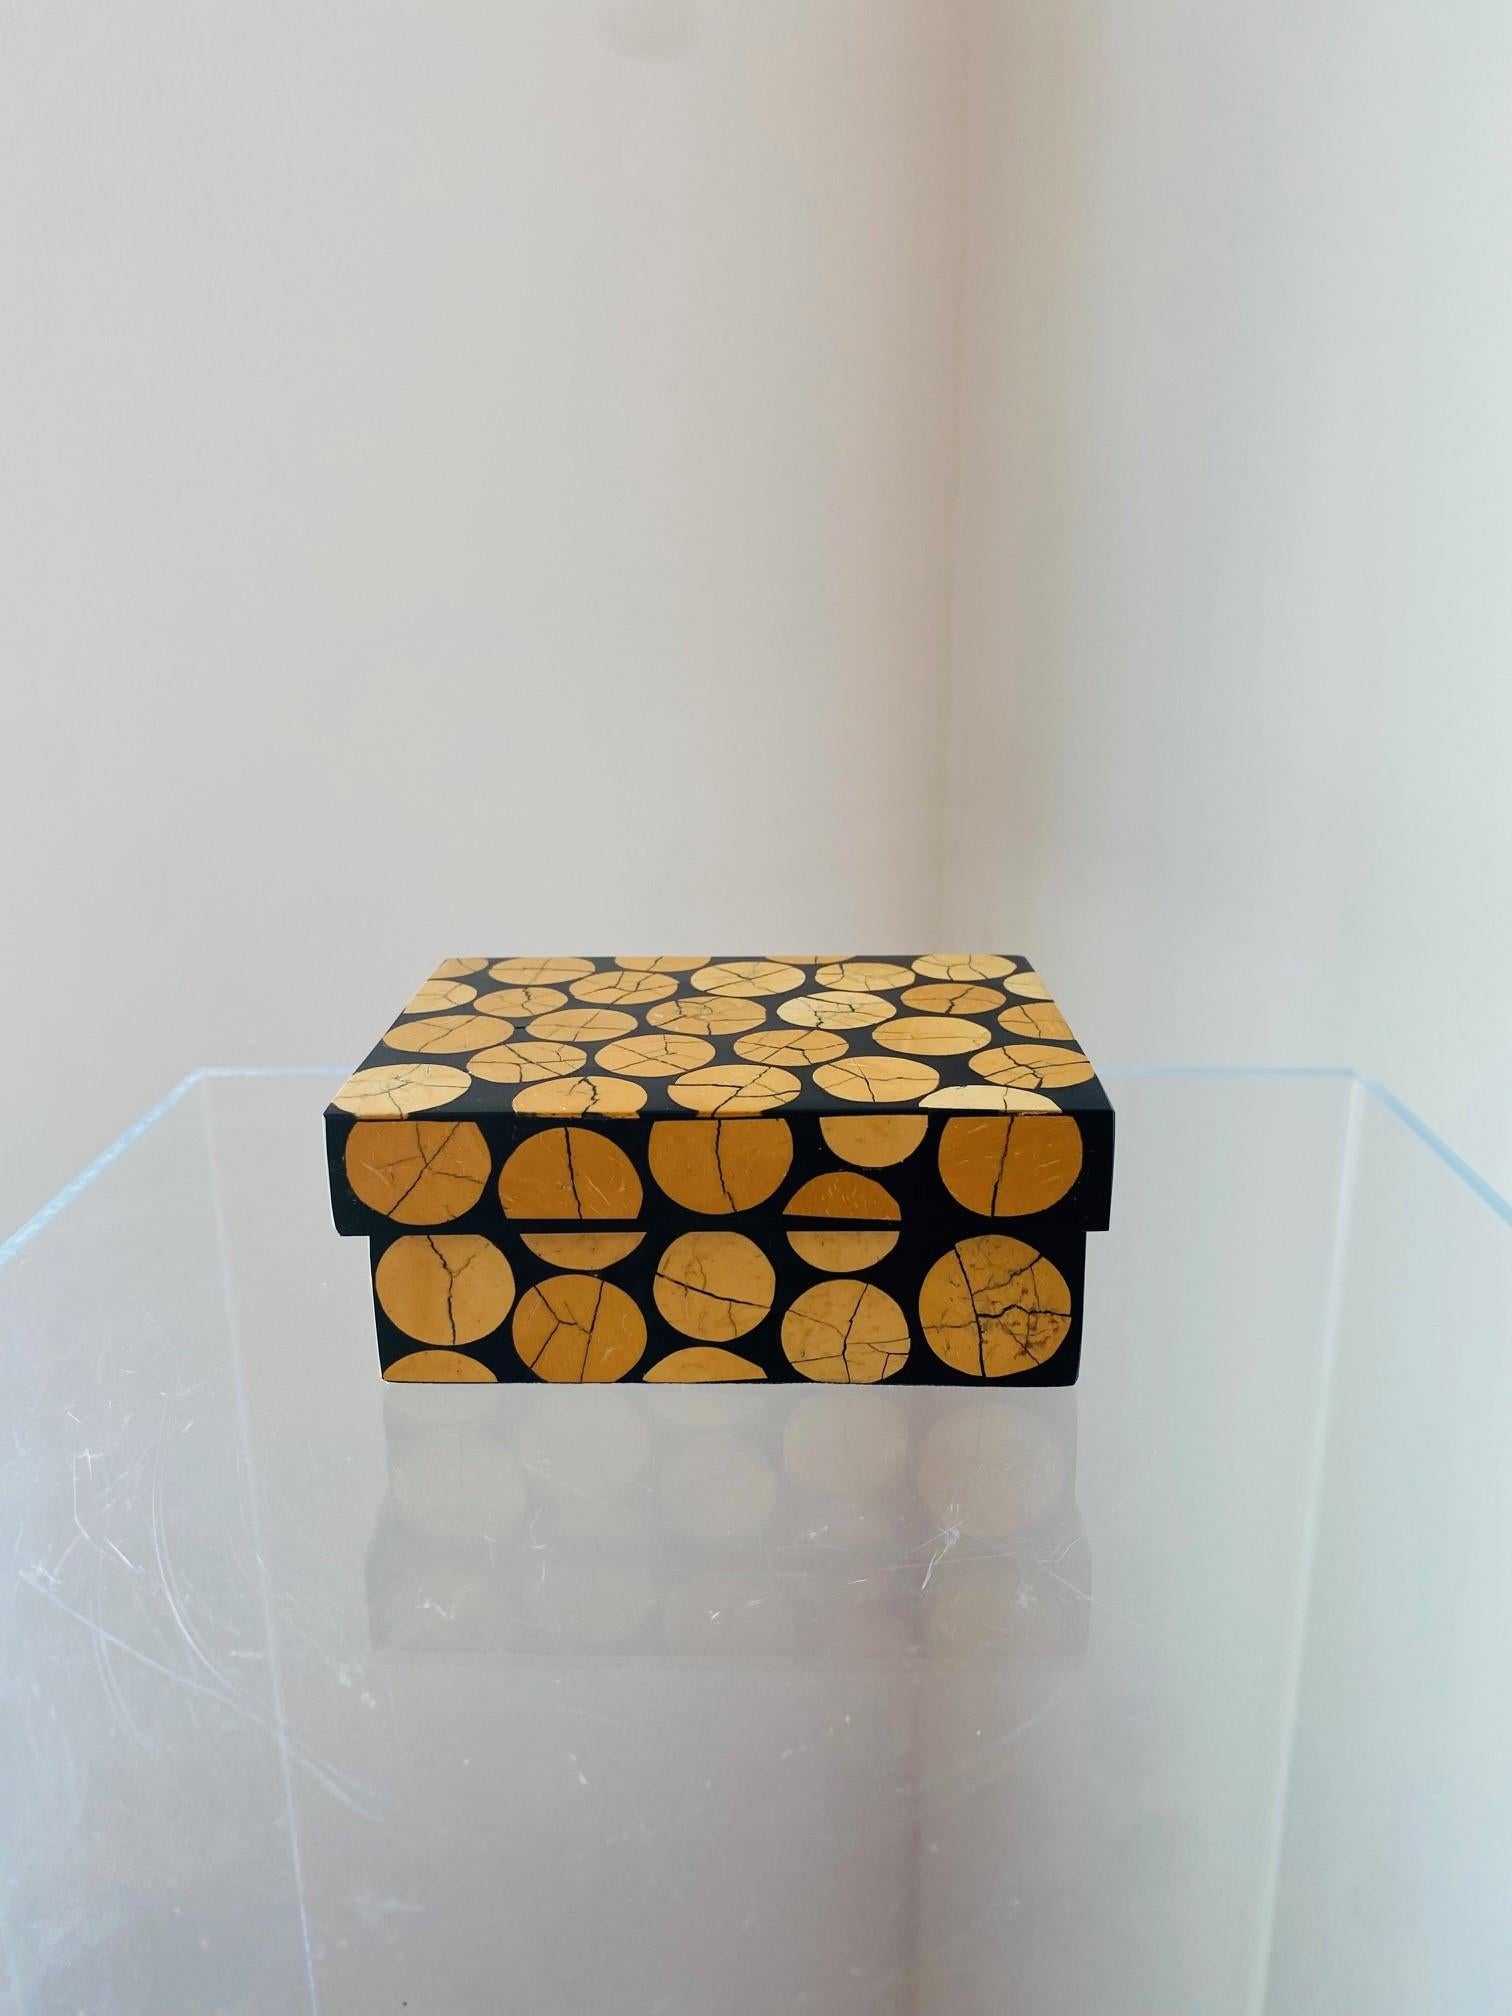 Beautiful and Minimalist trinket box by R Y Augousti. This rare beauty is a unique trinket box or decorative box that brings minimal shape with organic beauty. Constructed of wood panels that have been lacquered, the piece has aged beautifully and